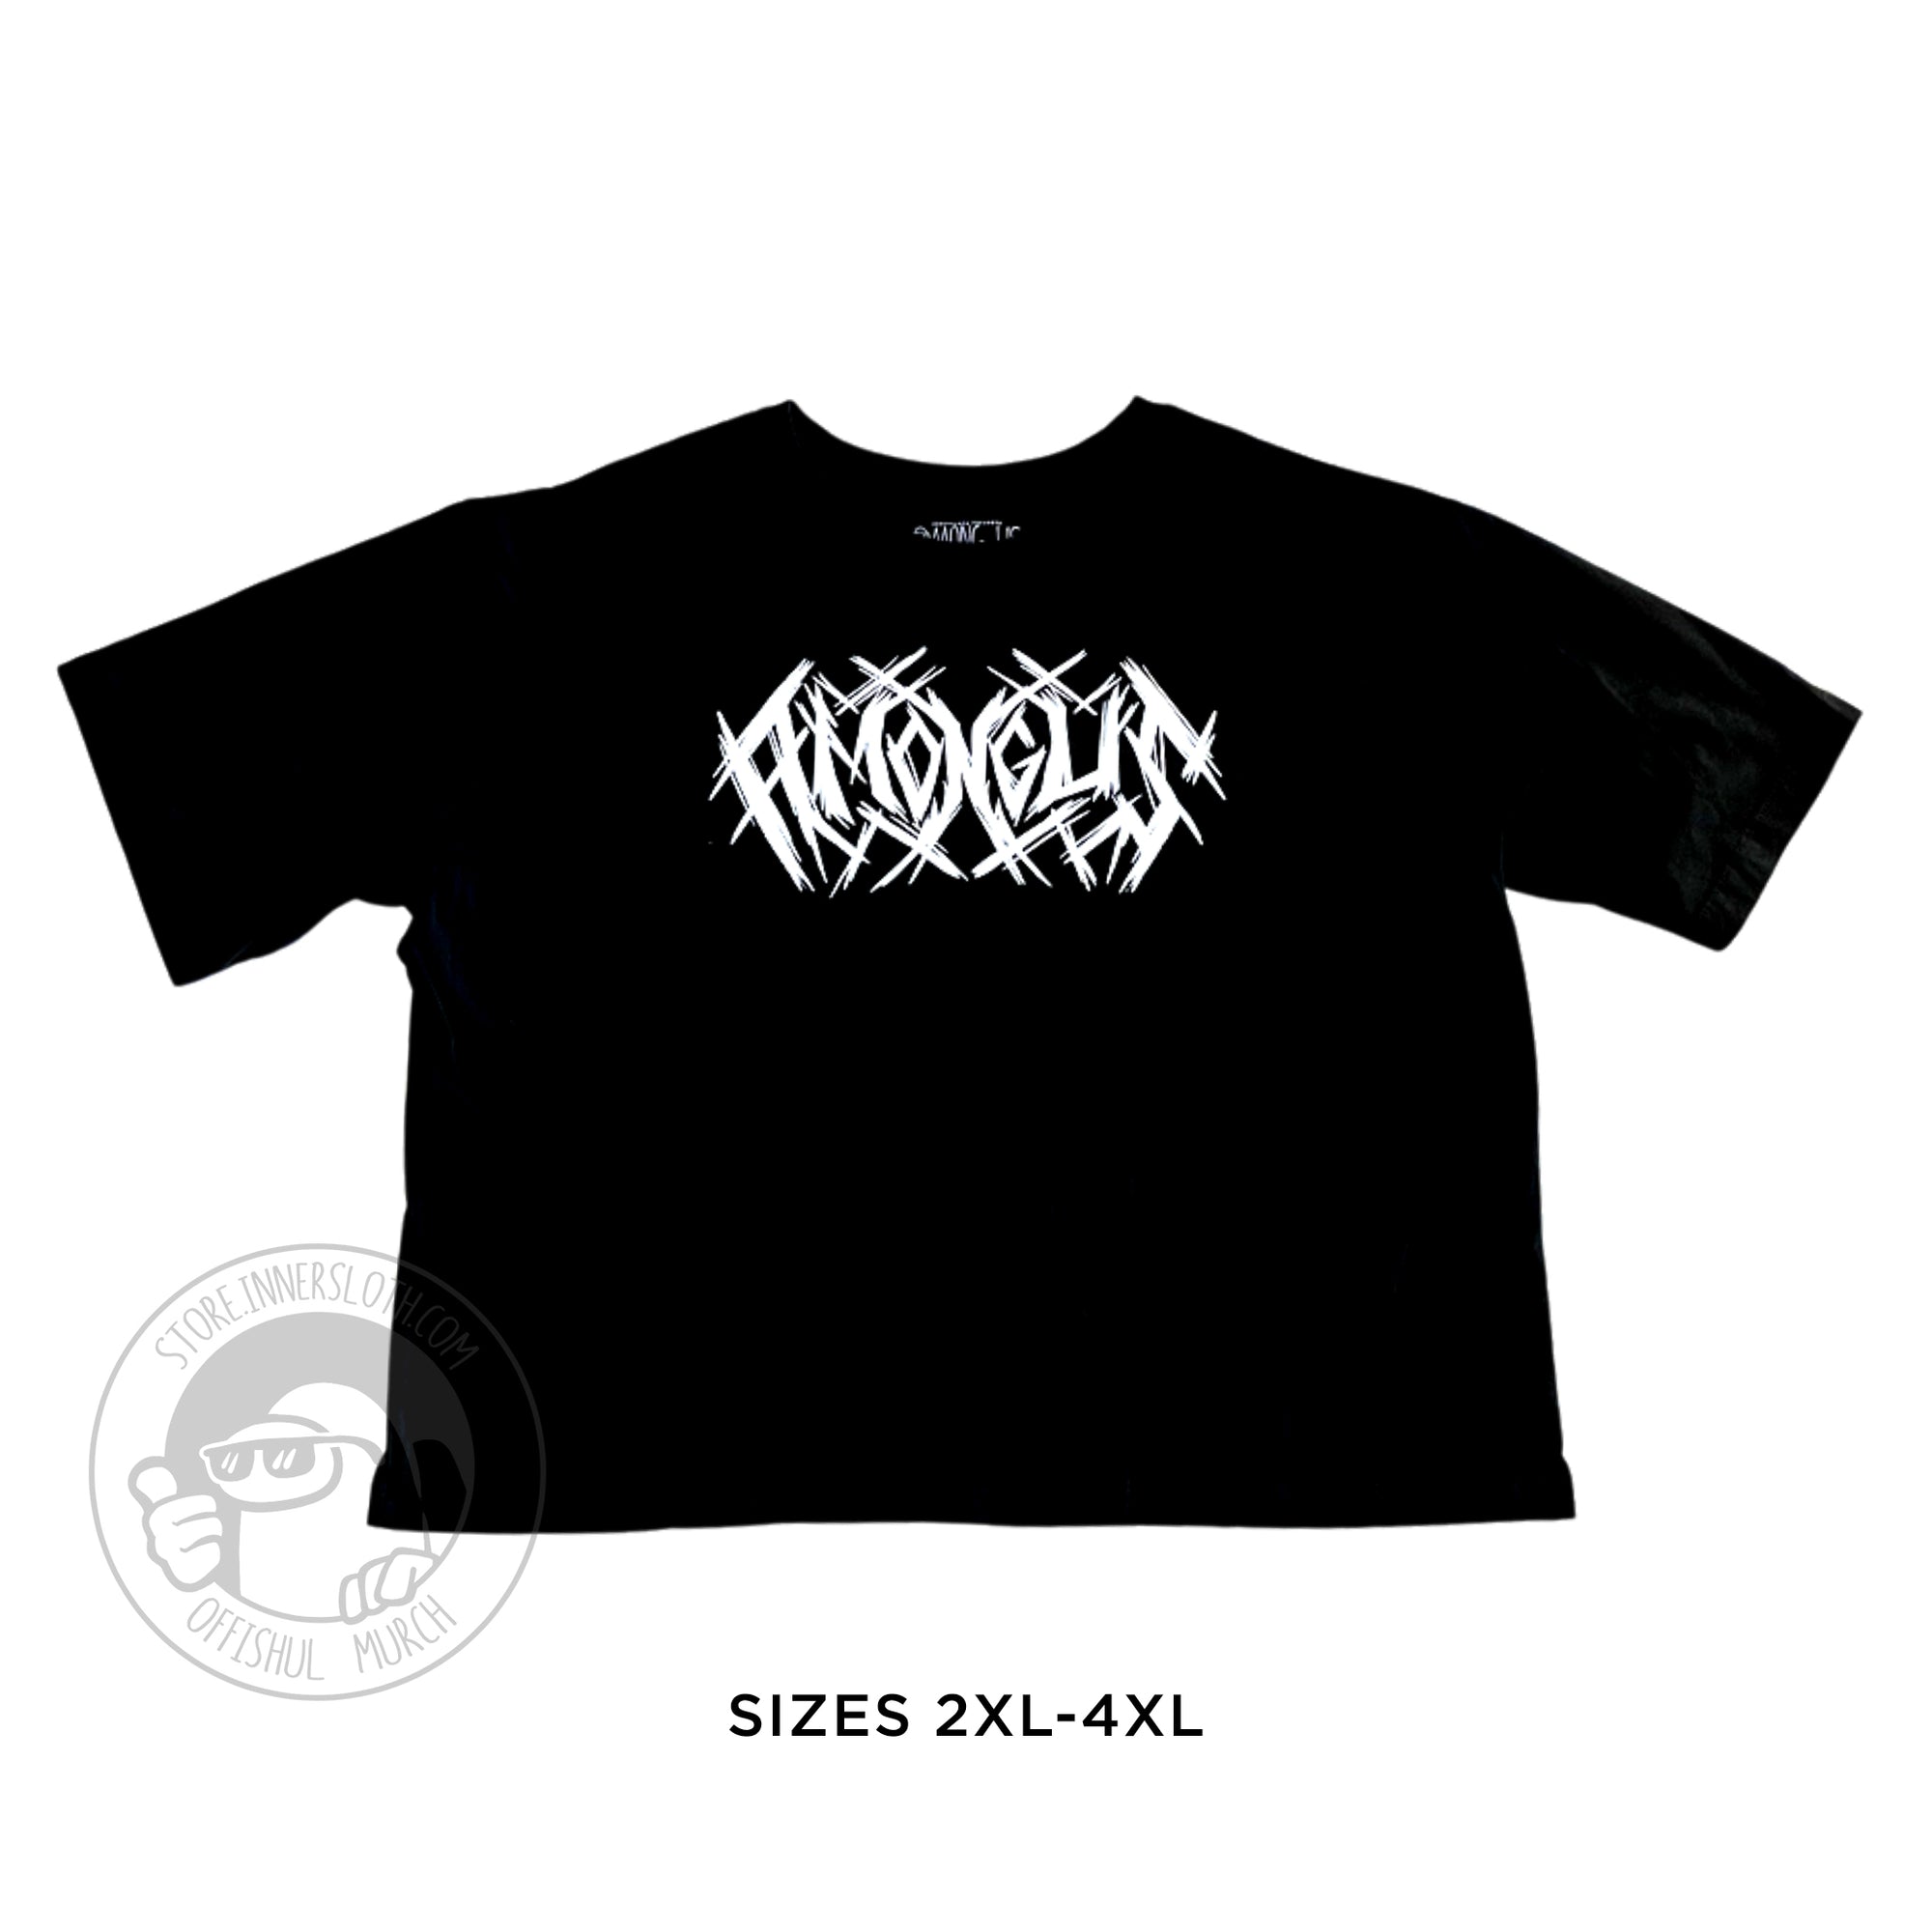 A product photo of a cropped black t-shirt. “Among Us” is written in traditional, scratchy heavy metal text across the chest.